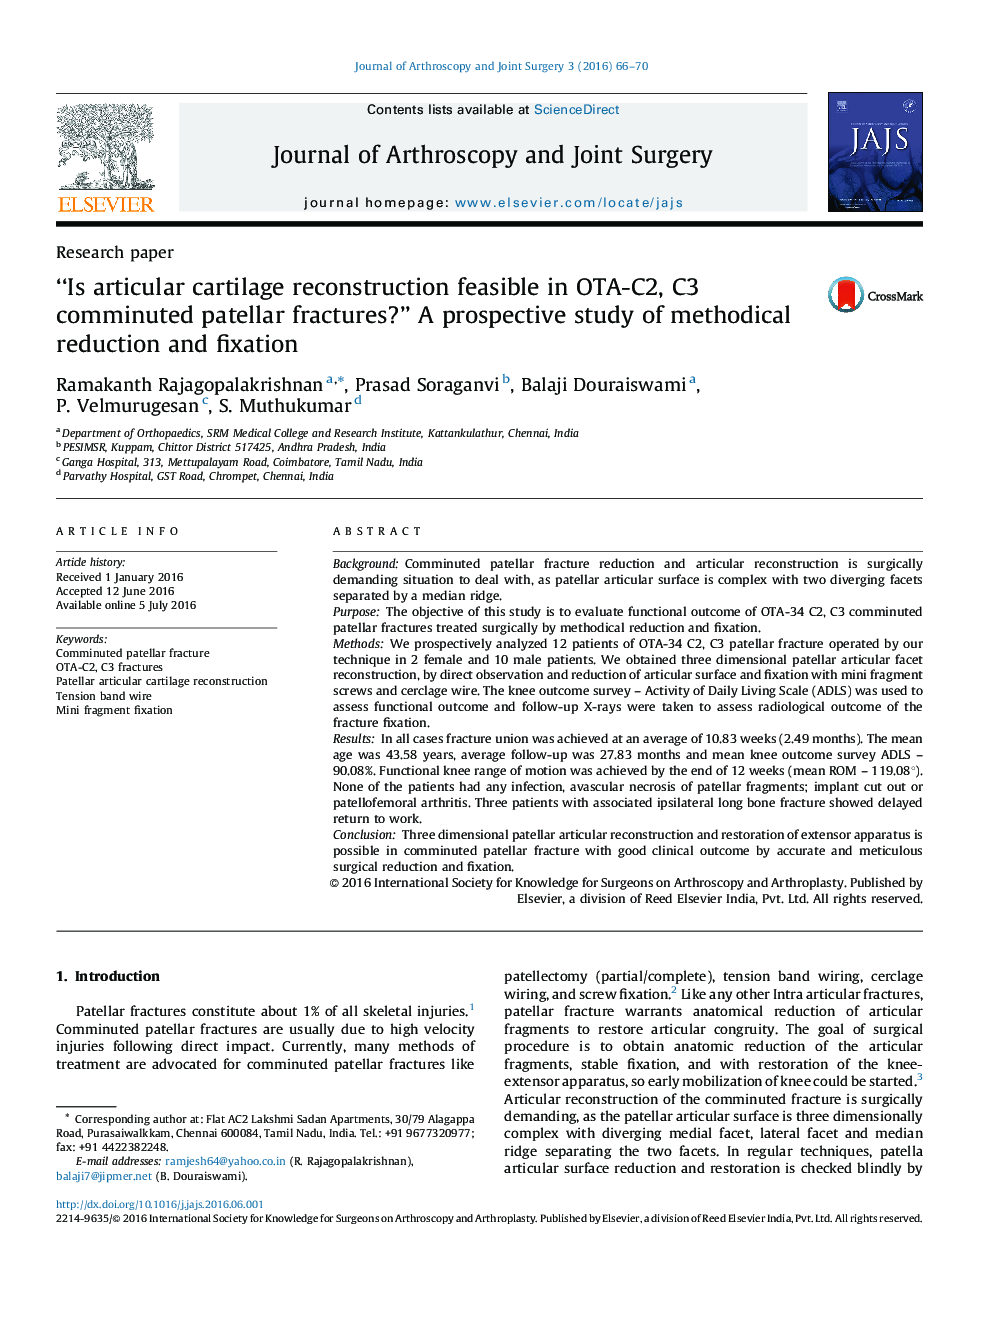 “Is articular cartilage reconstruction feasible in OTA-C2, C3 comminuted patellar fractures?” A prospective study of methodical reduction and fixation